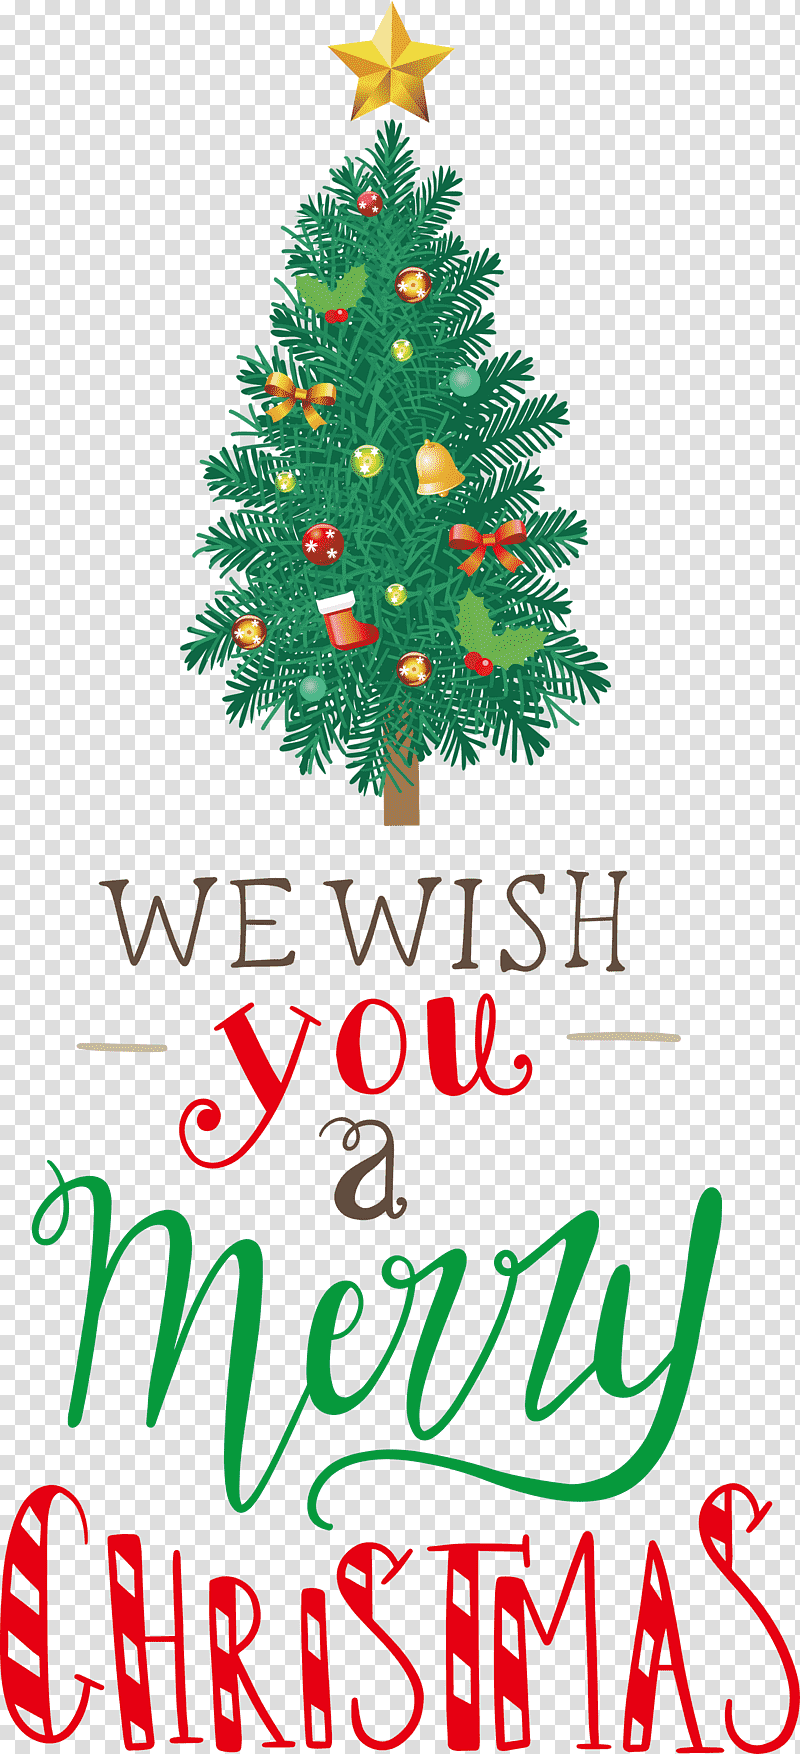 Merry Christmas We Wish You A Merry Christmas, Christmas Tree, Christmas Day, Spruce, Holiday Ornament, Christmas Ornament, Fir transparent background PNG clipart